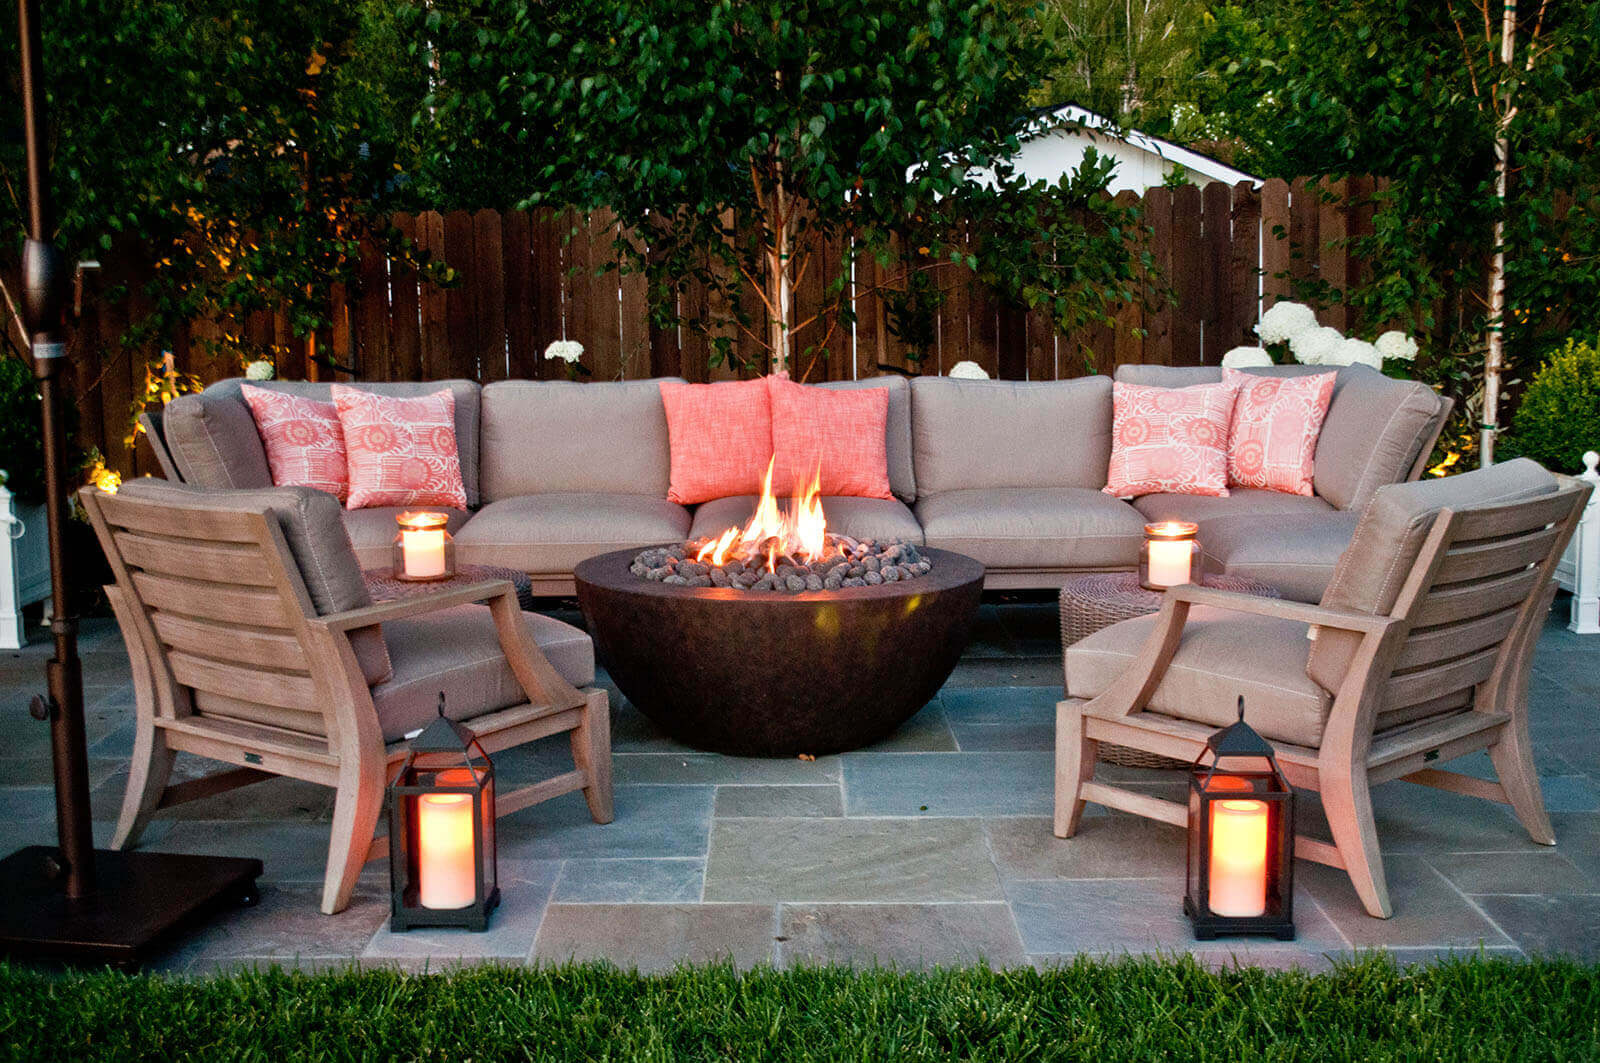 Bluestone patio with contemporary fire bowl, lanterns, and outdoor lounges